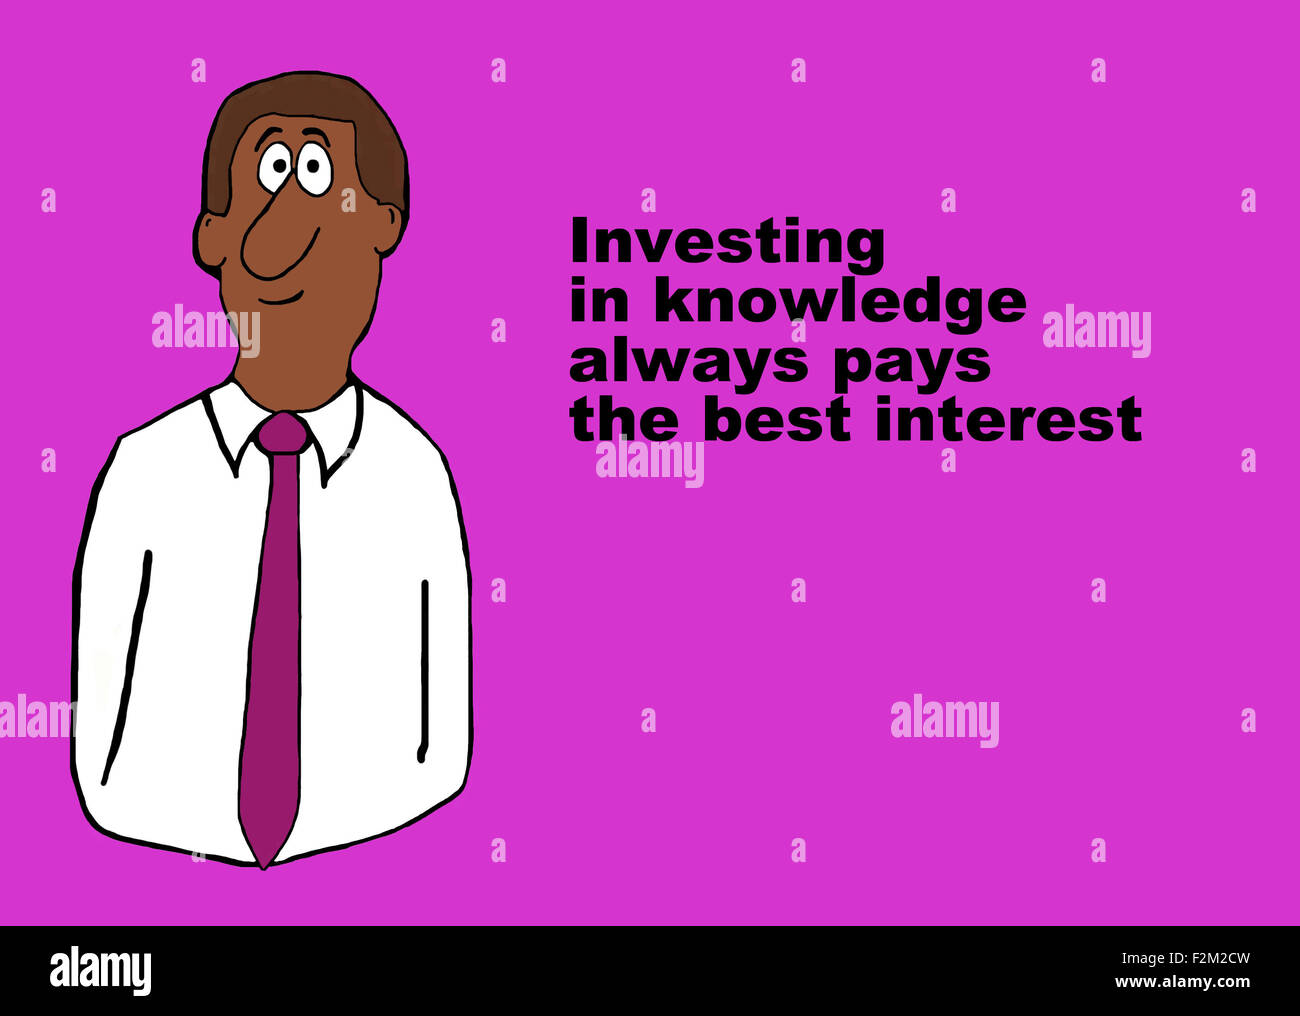 Business and education illustration of black businessman and the words, 'Investing in knowledge always pays the best interest'. Stock Photo